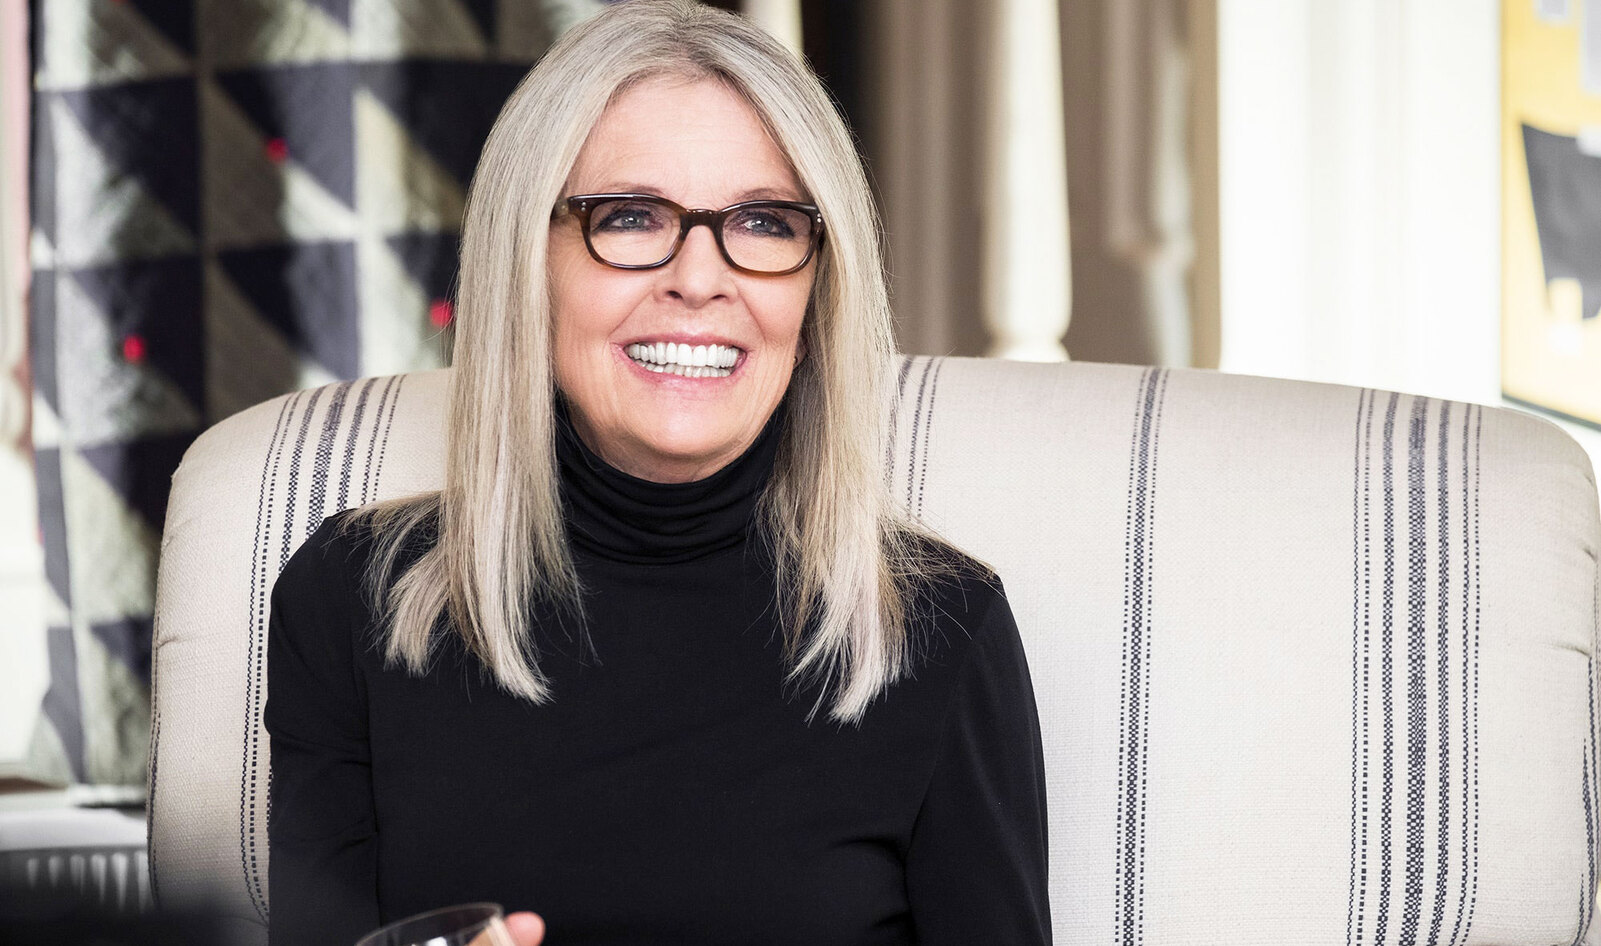 Diane Keaton Joins Fight to Stop Animal Cruelty Exposed by Tiger King |  VegNews